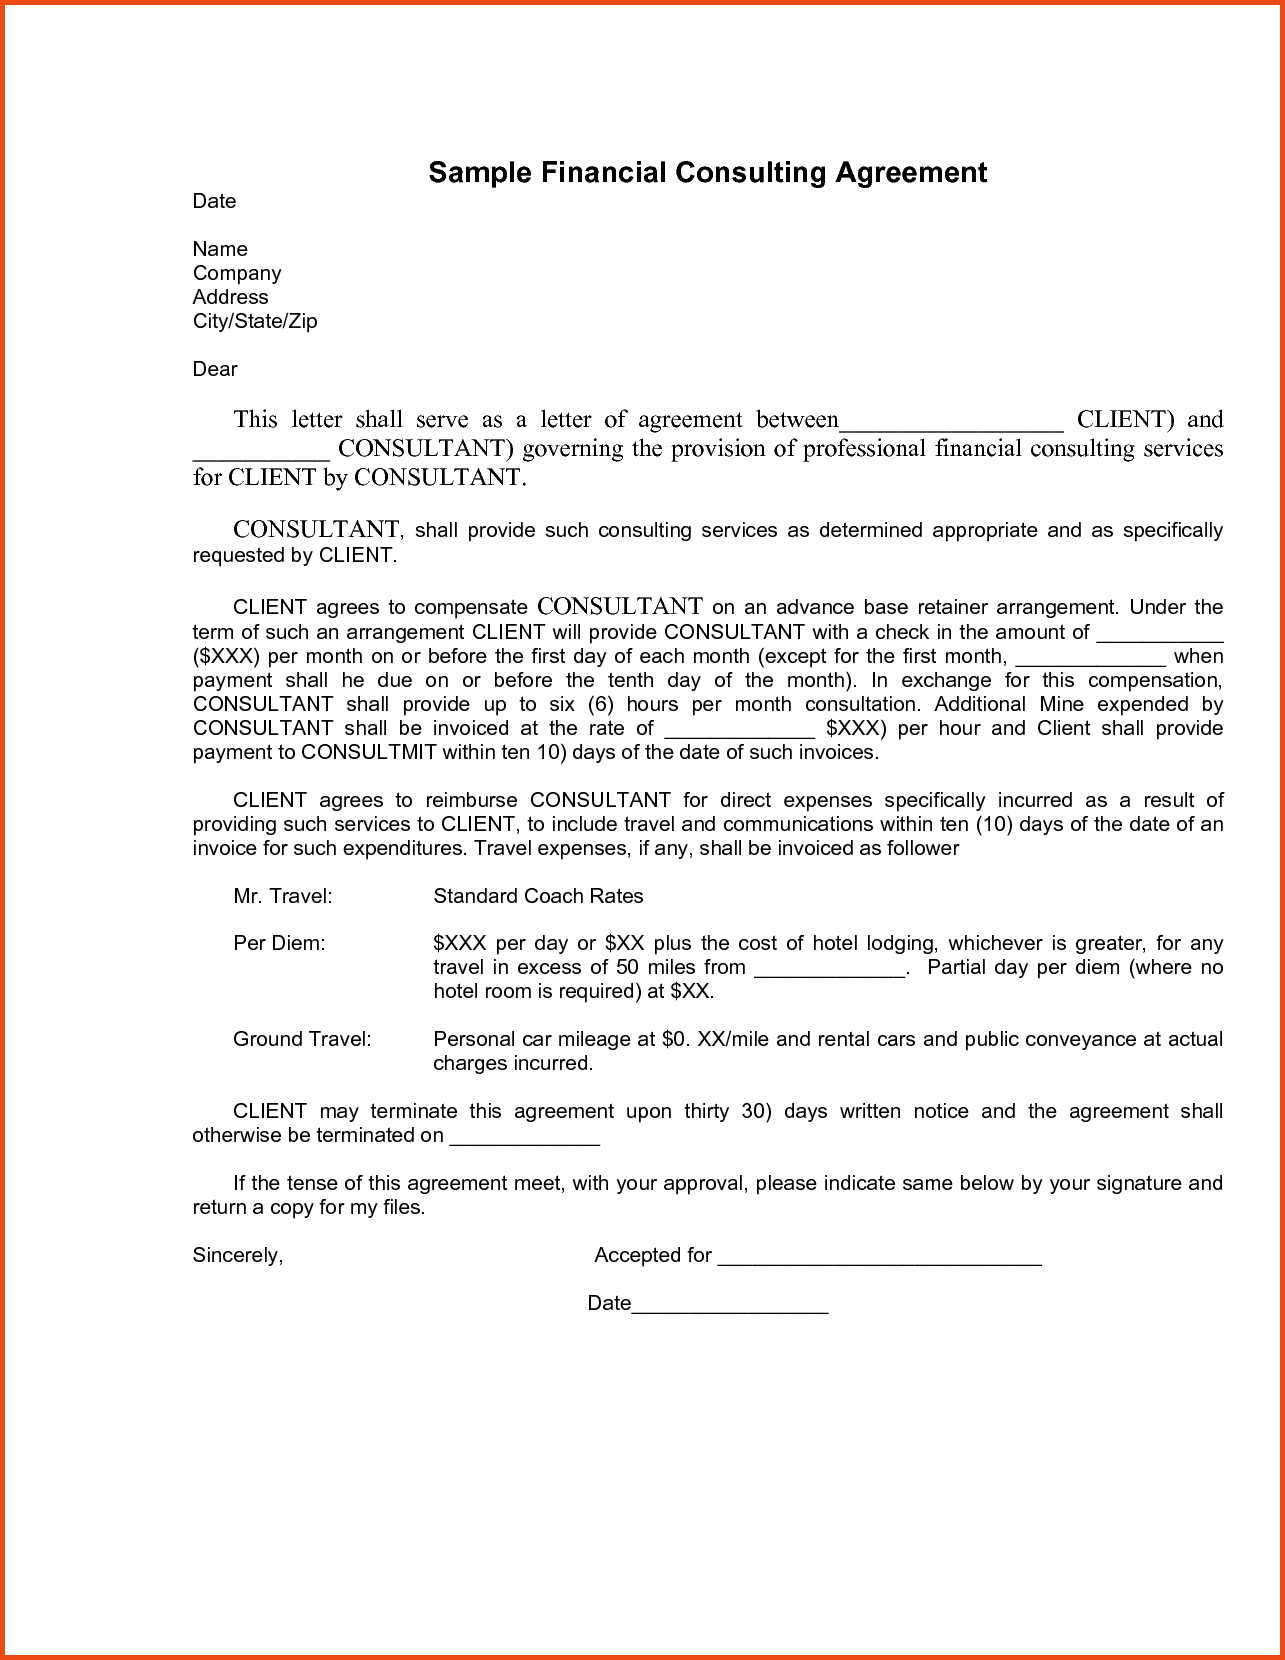 Agreement: Consulting Agreement Form. Consulting Agreement Form